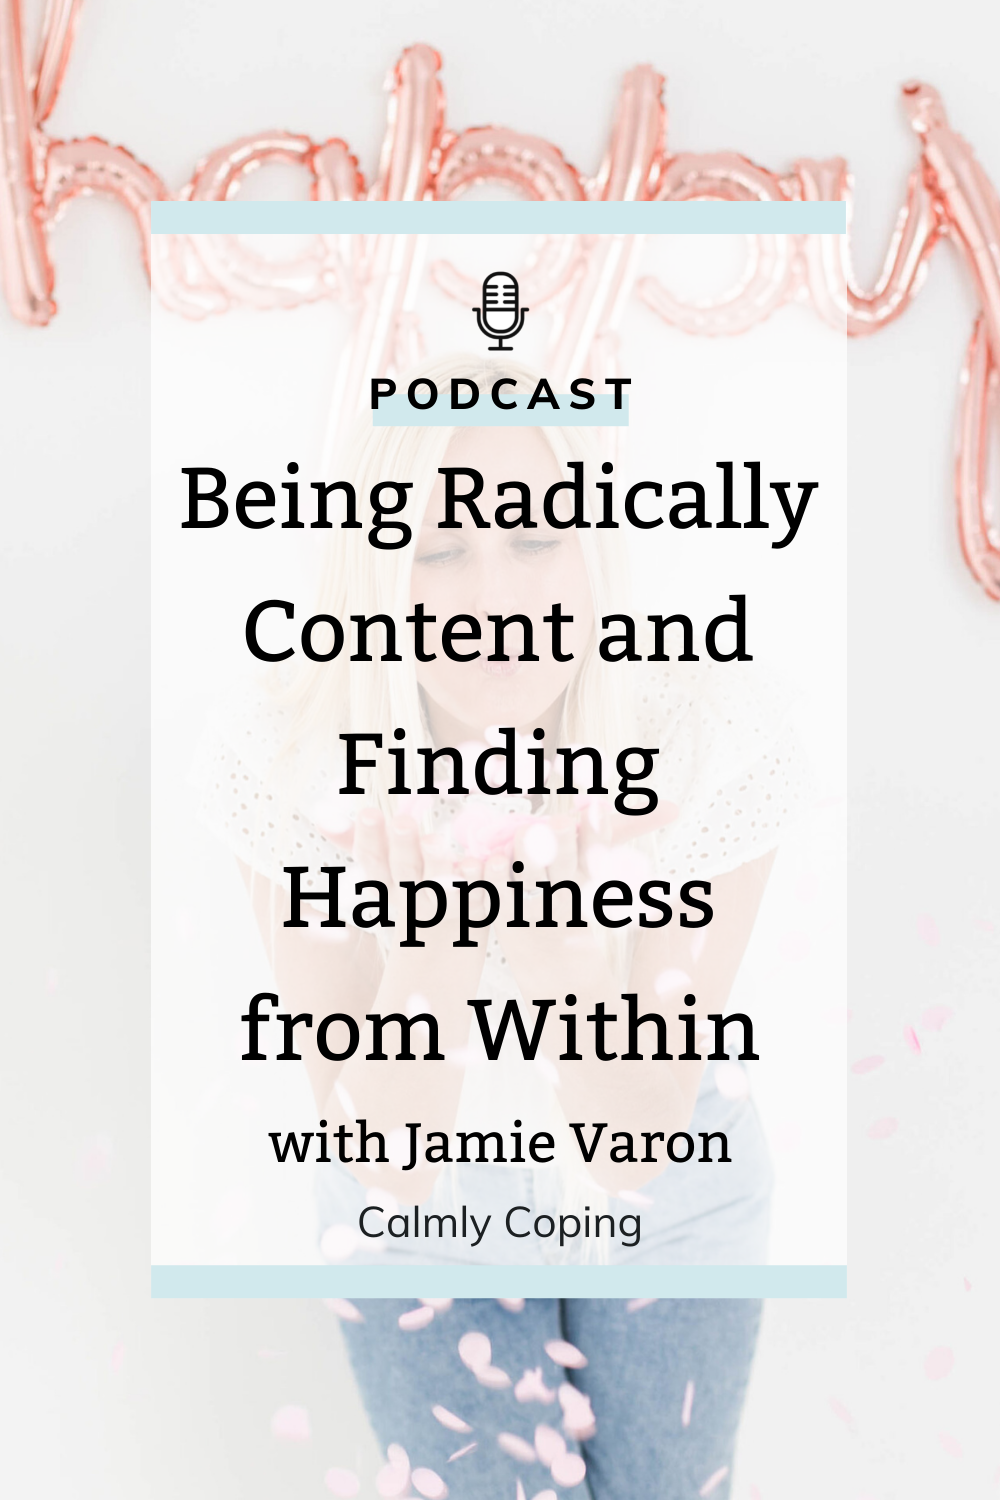 Being Radically Content and Finding Happiness from Within with Jamie Varon